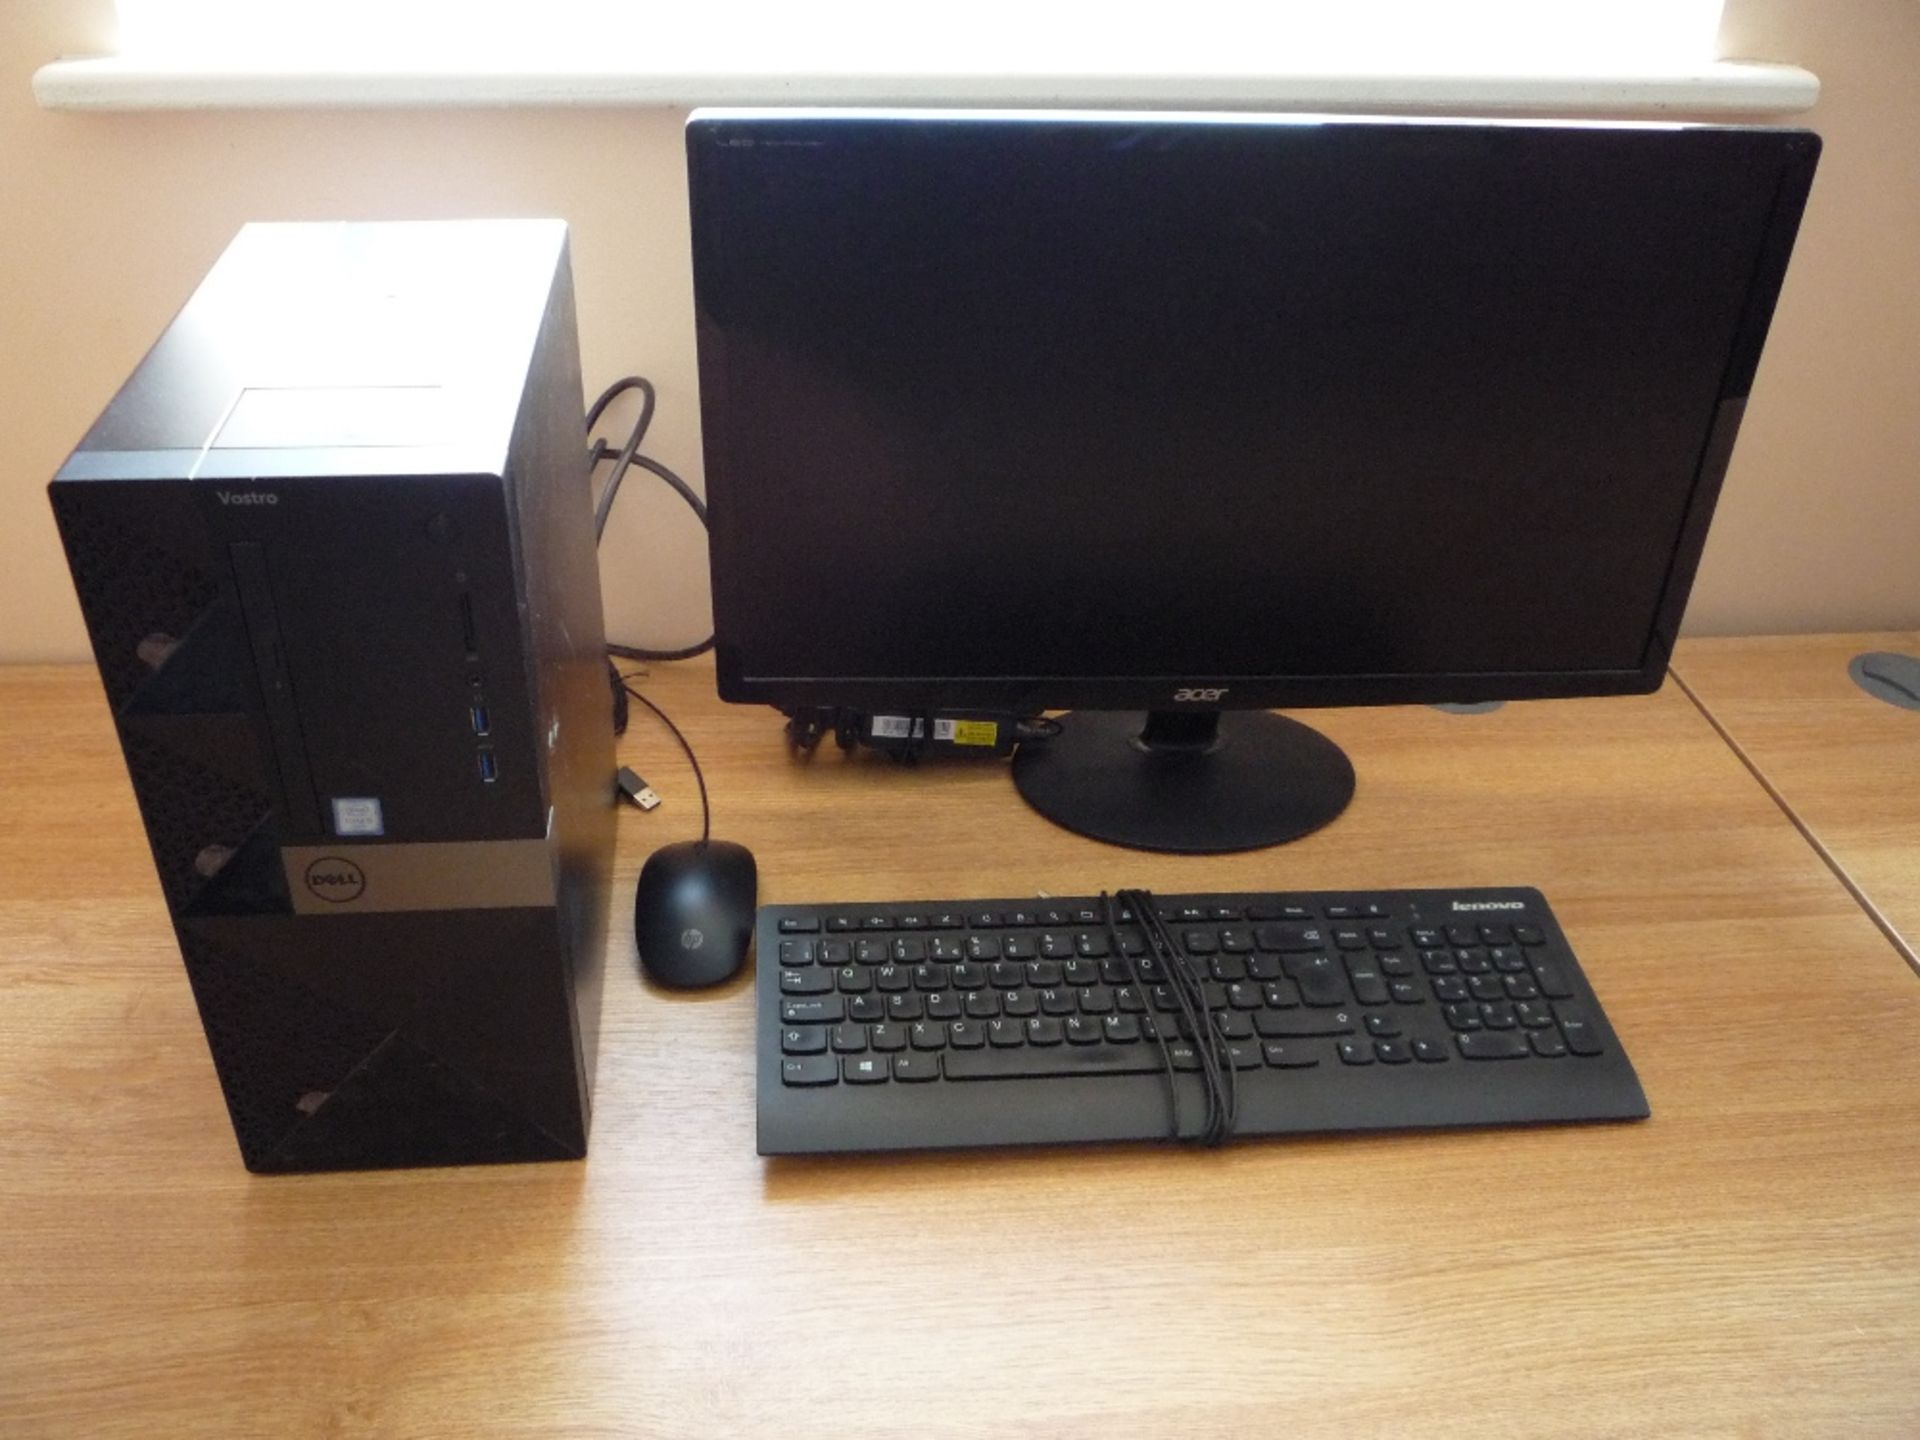 Dell Vostro PC, Acer Monitor & Keyboard